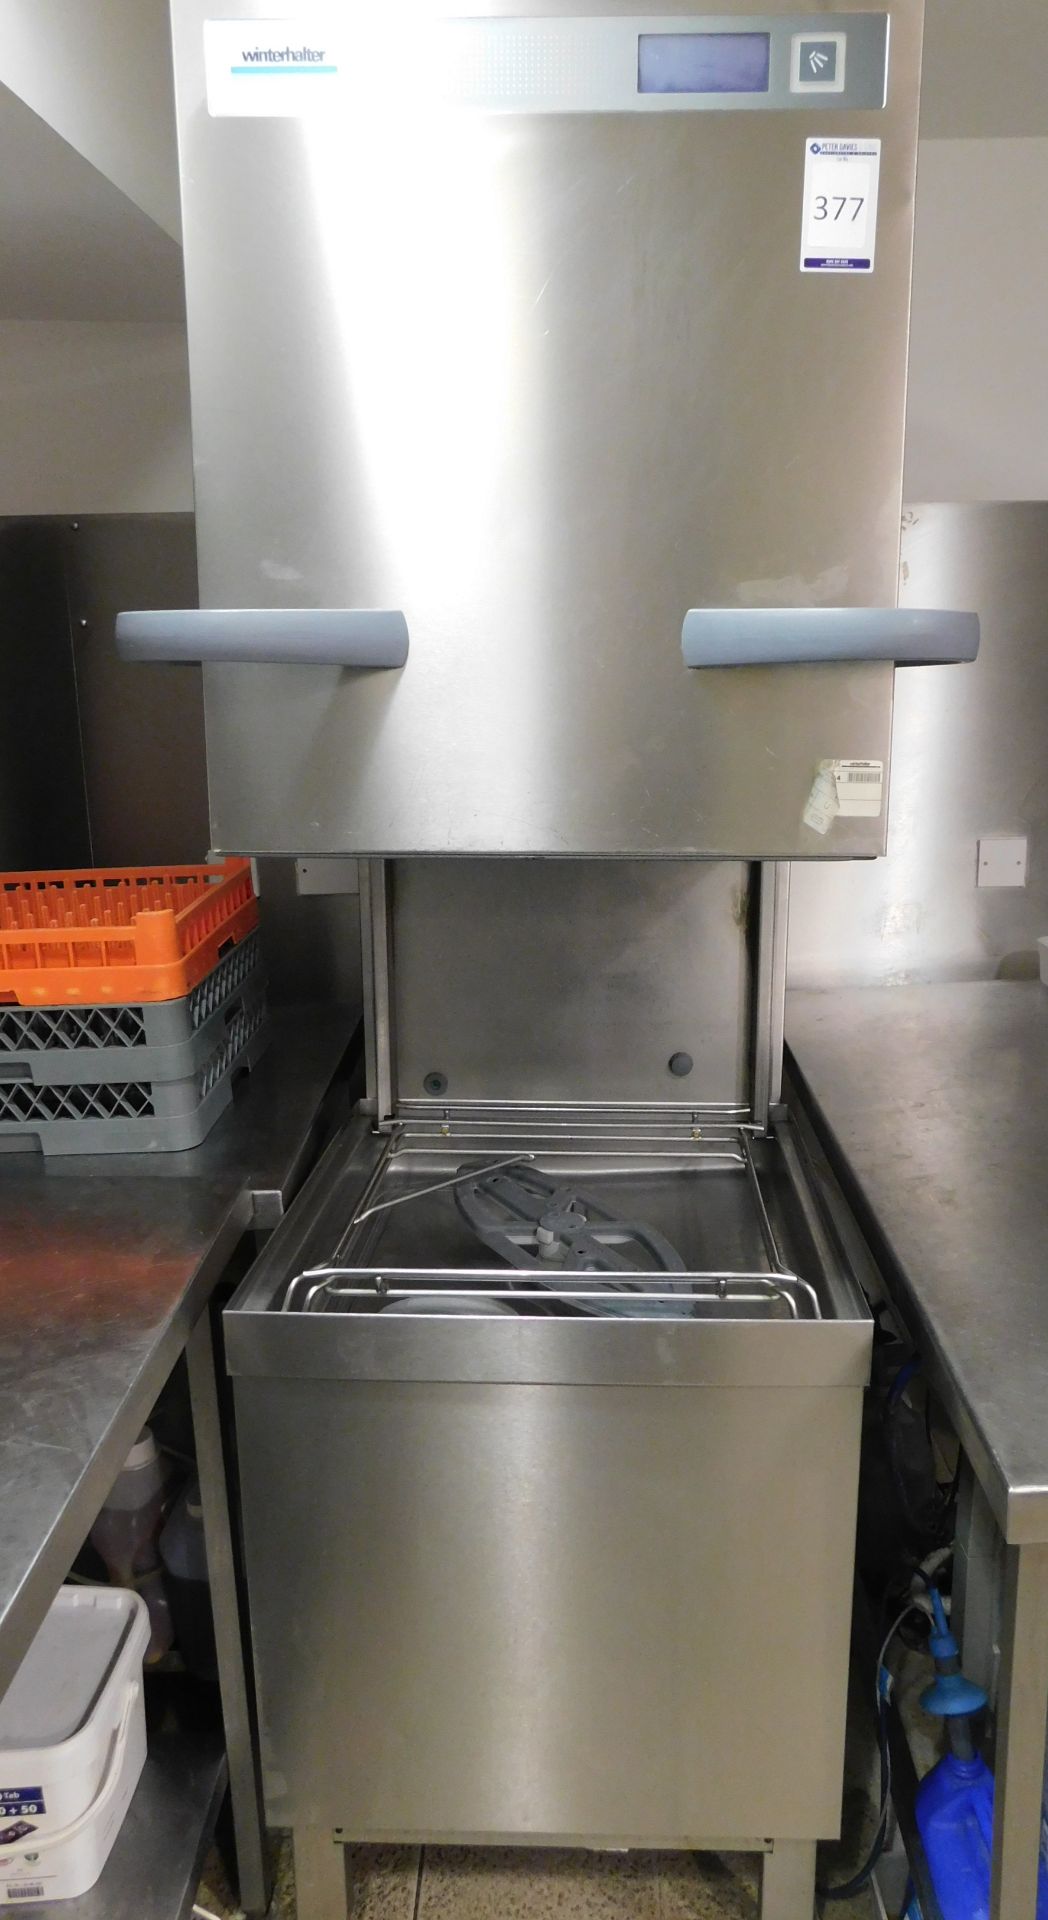 Winterhalter PT-M Hood Stainless Steel Cased Commercial Dishwasher (Located at 155 Farringdon